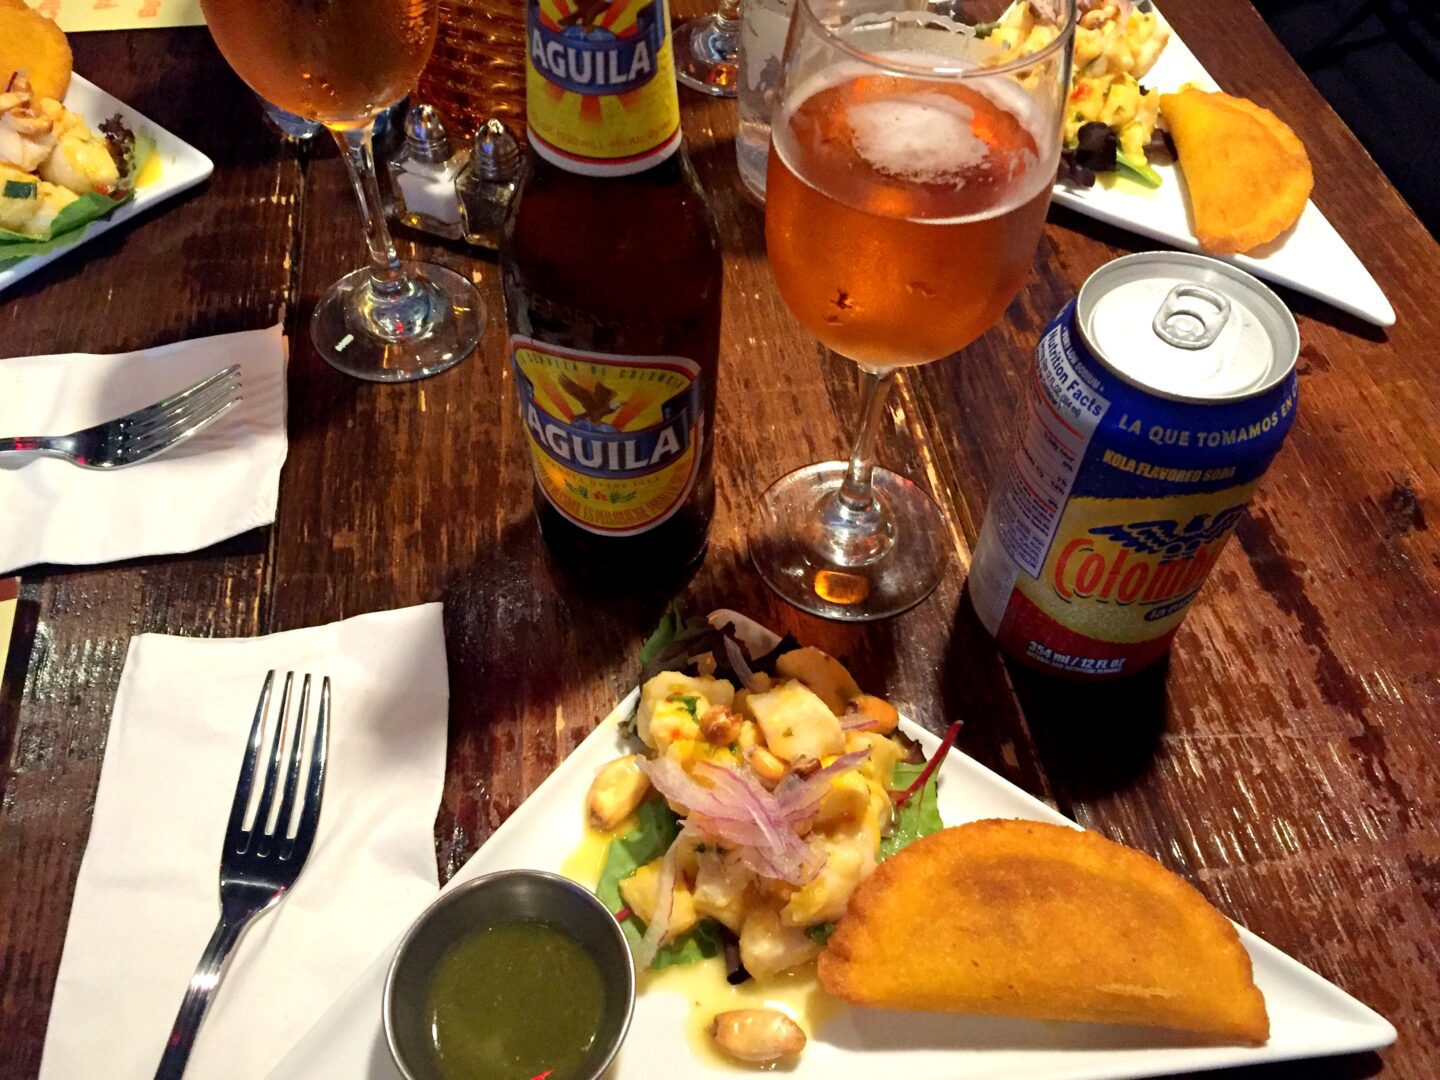 Bolivar's passion fruit ceviche served with a Columbian beer and soda cocktail.